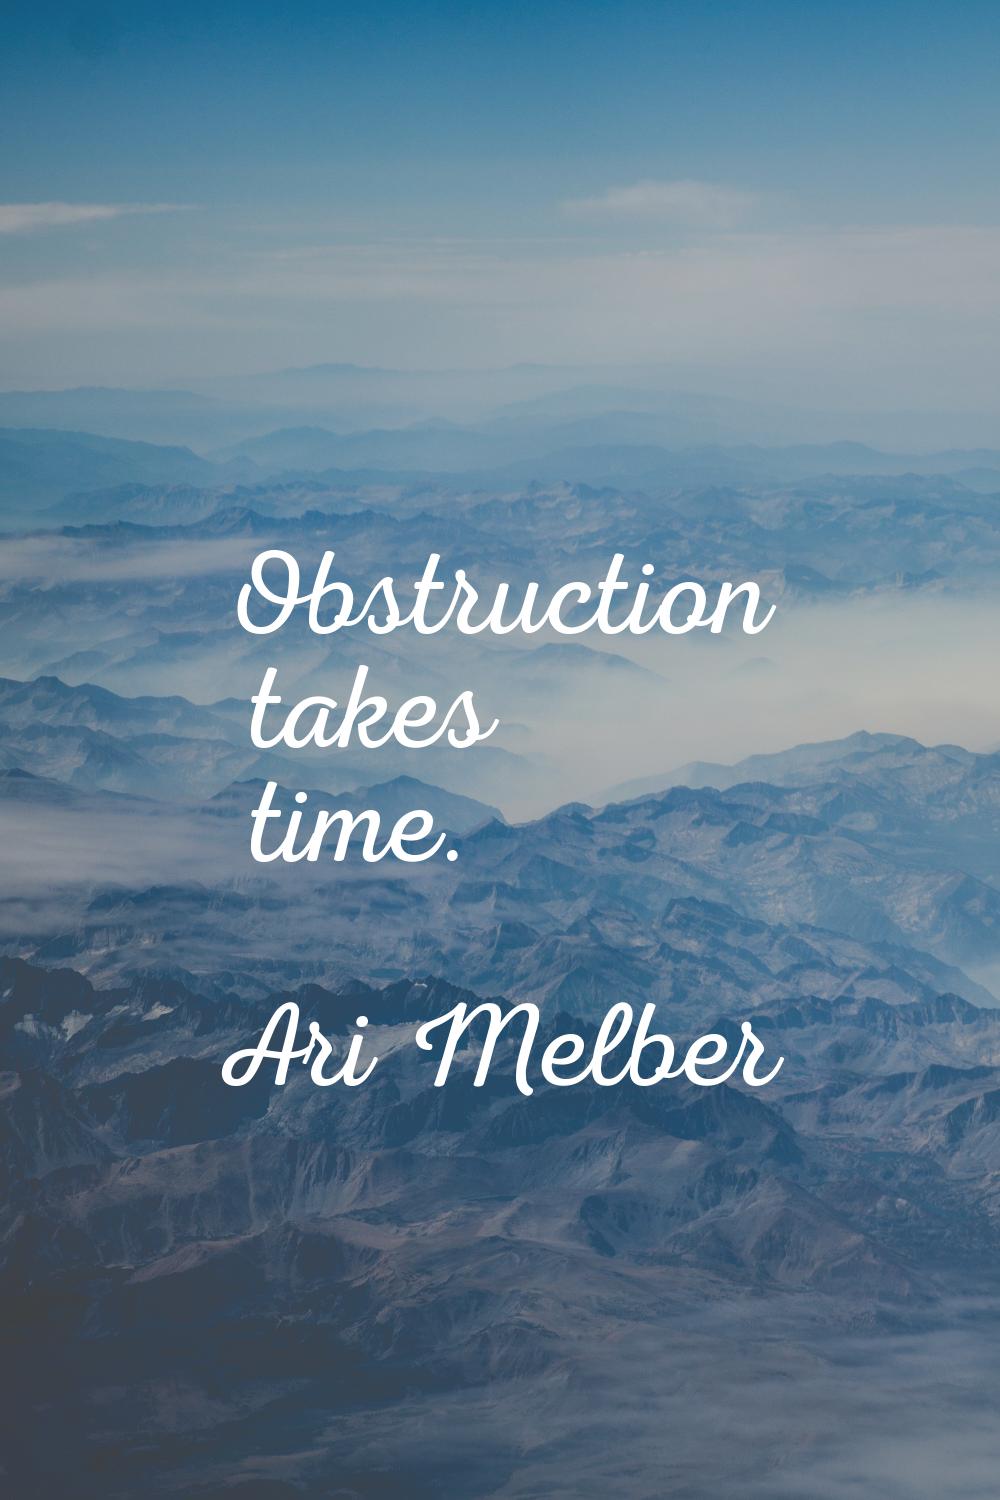 Obstruction takes time.